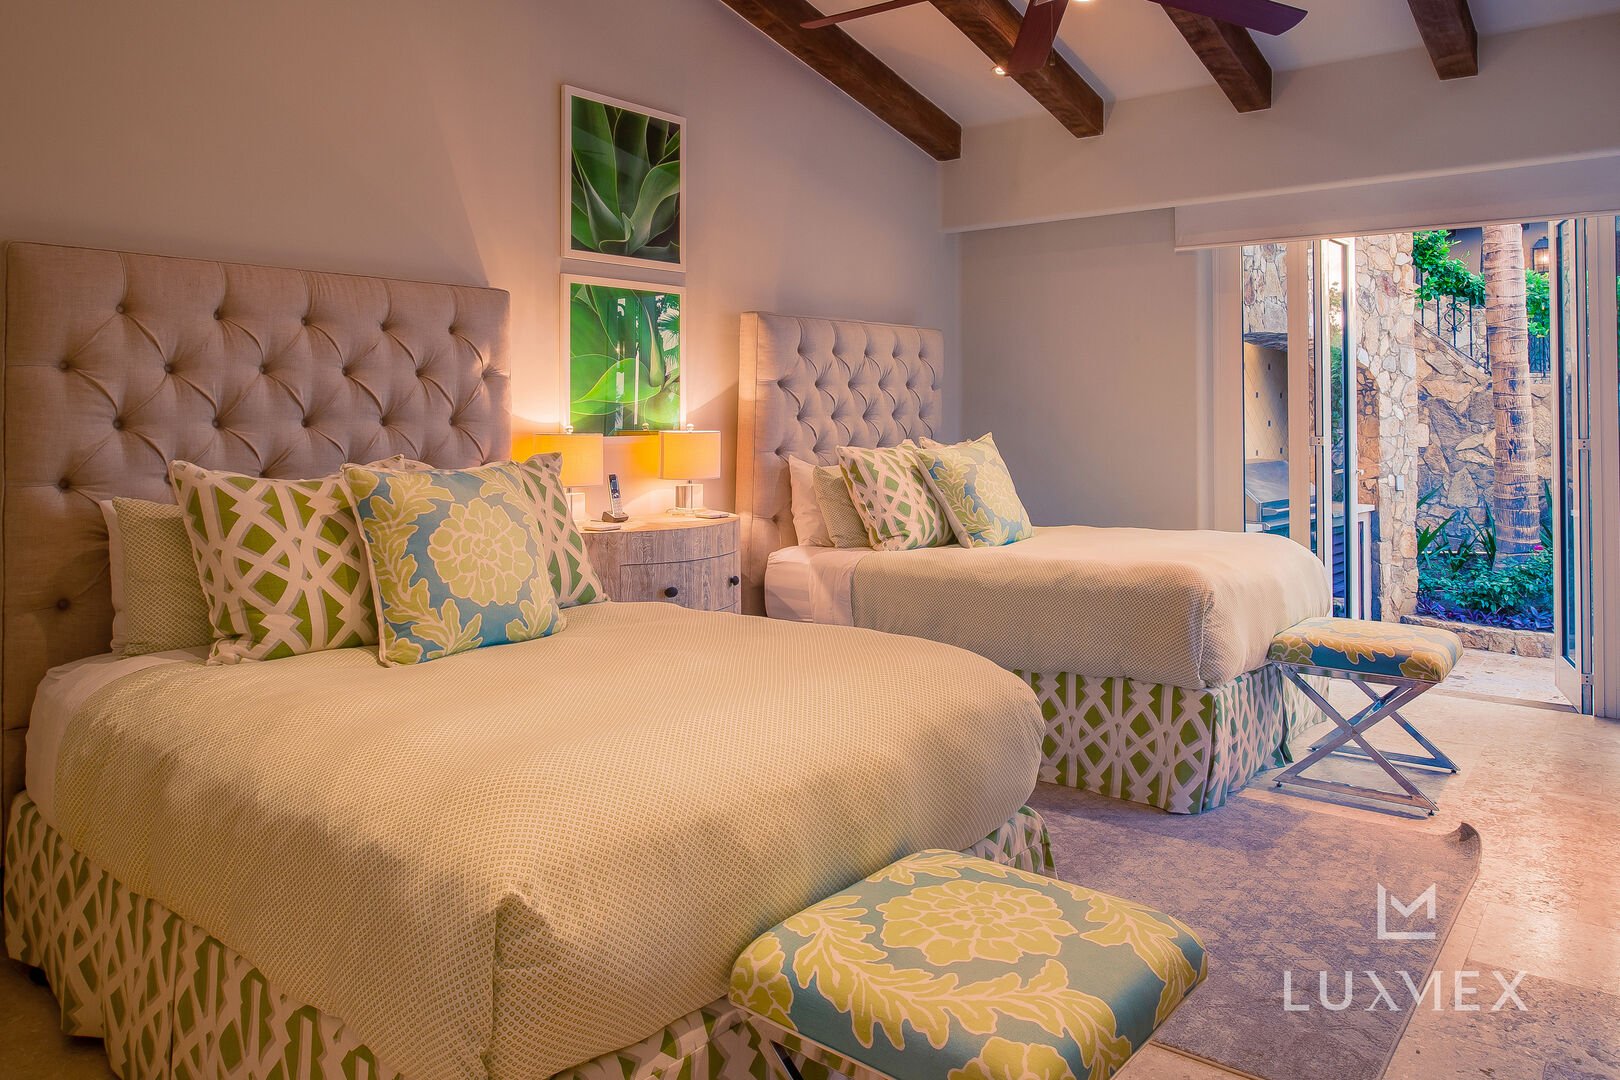 Two beds side by side in one of the bedrooms of this Los Cabos Luxury Vacation Villa.